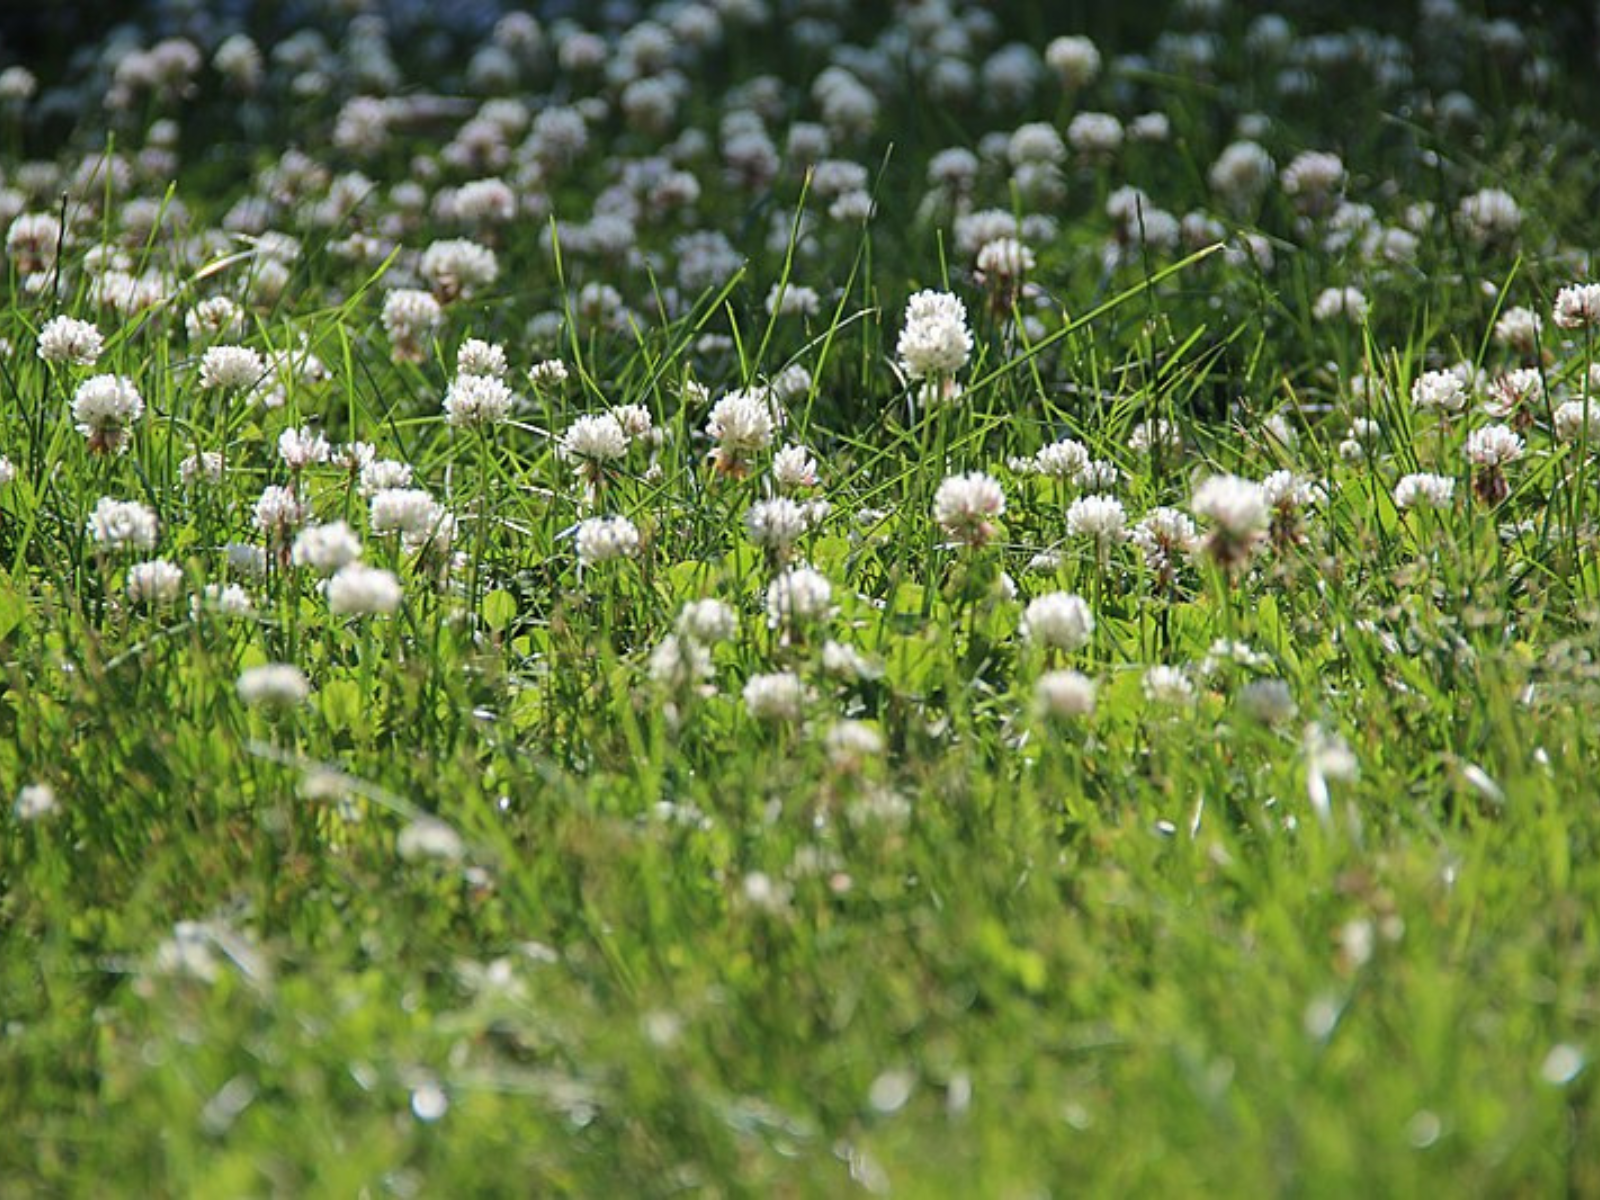 A field with white clover heads popping up from among the vegetation.